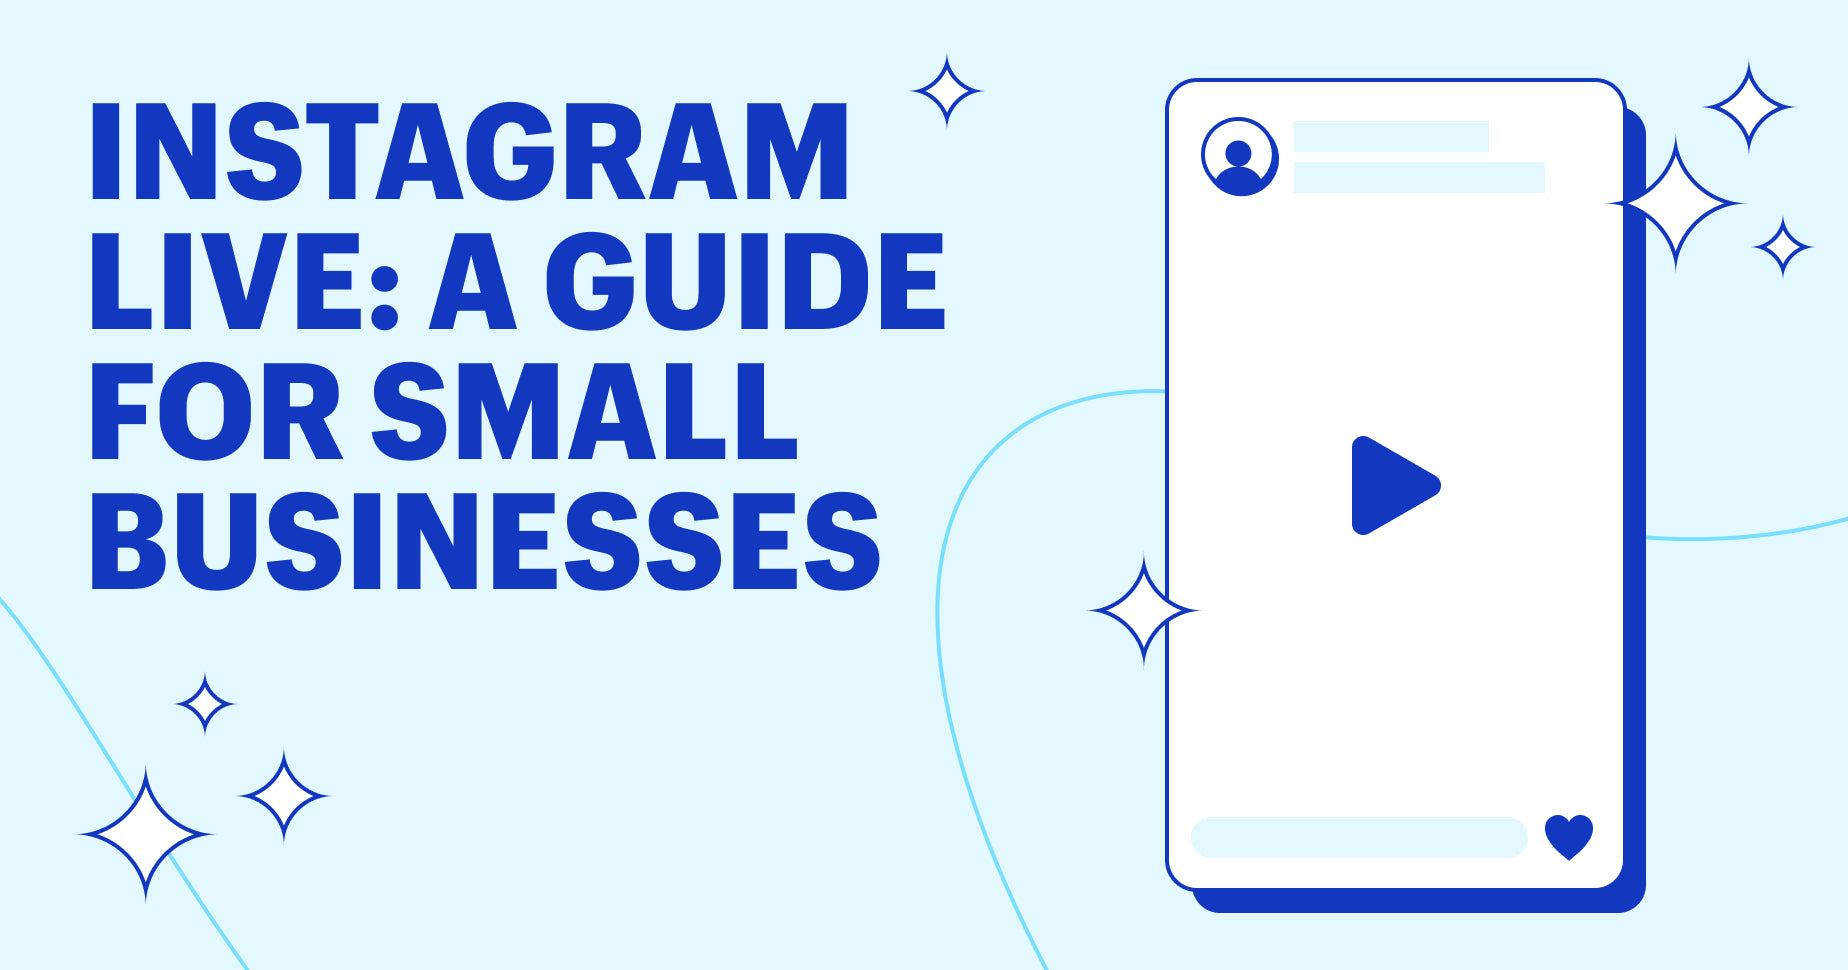 instagram live: a guide fro small businesses on left and right has an outline of Instagram Live ux